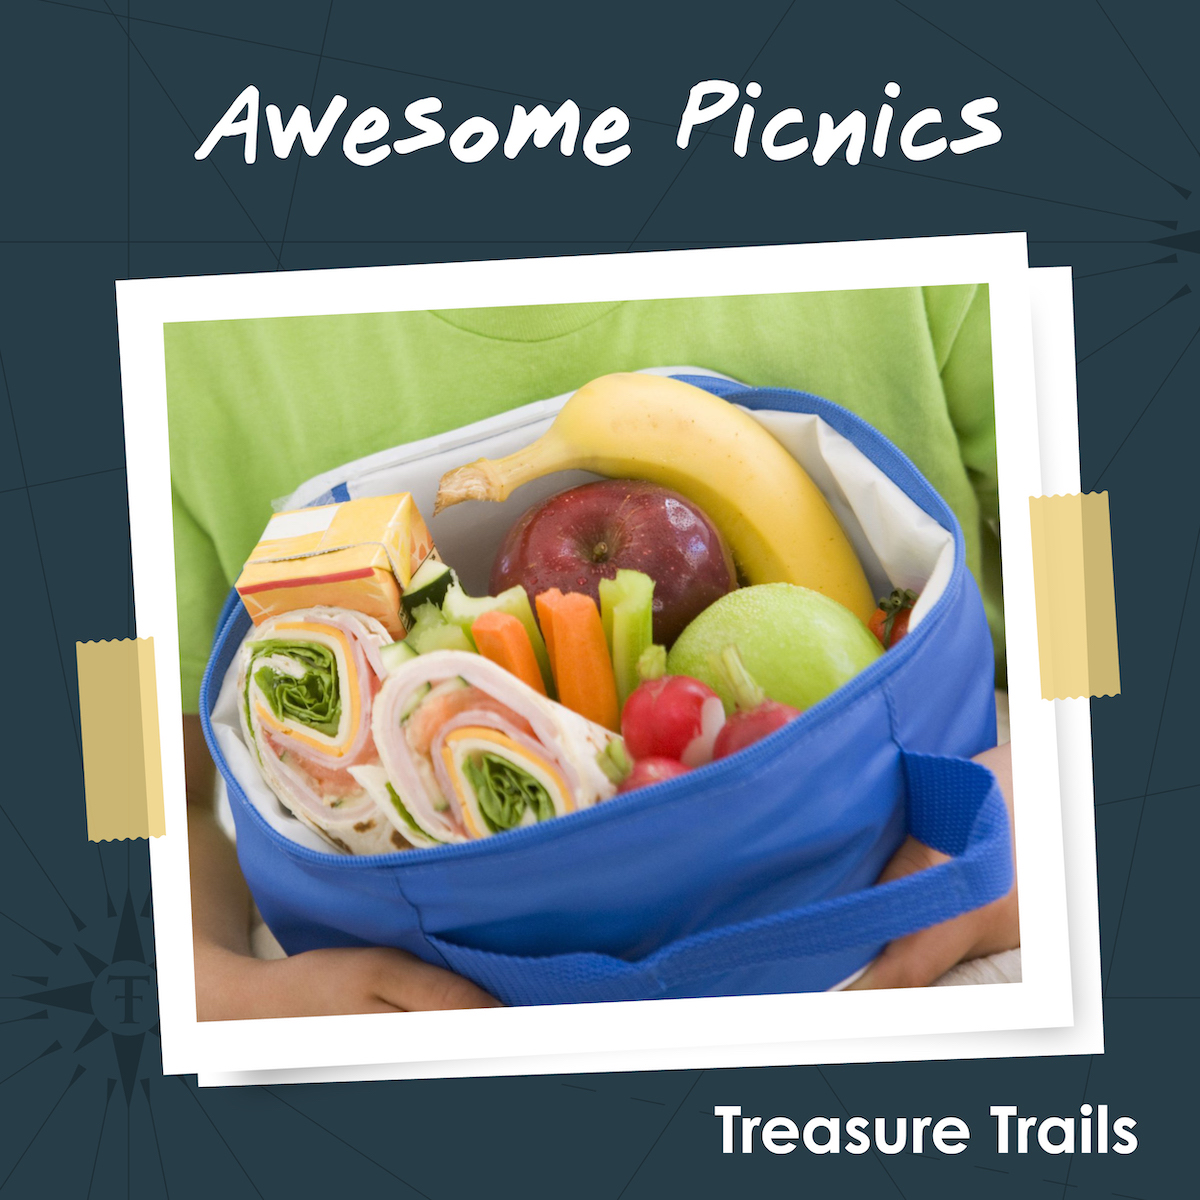 Awesome picnics with Treasure Trails